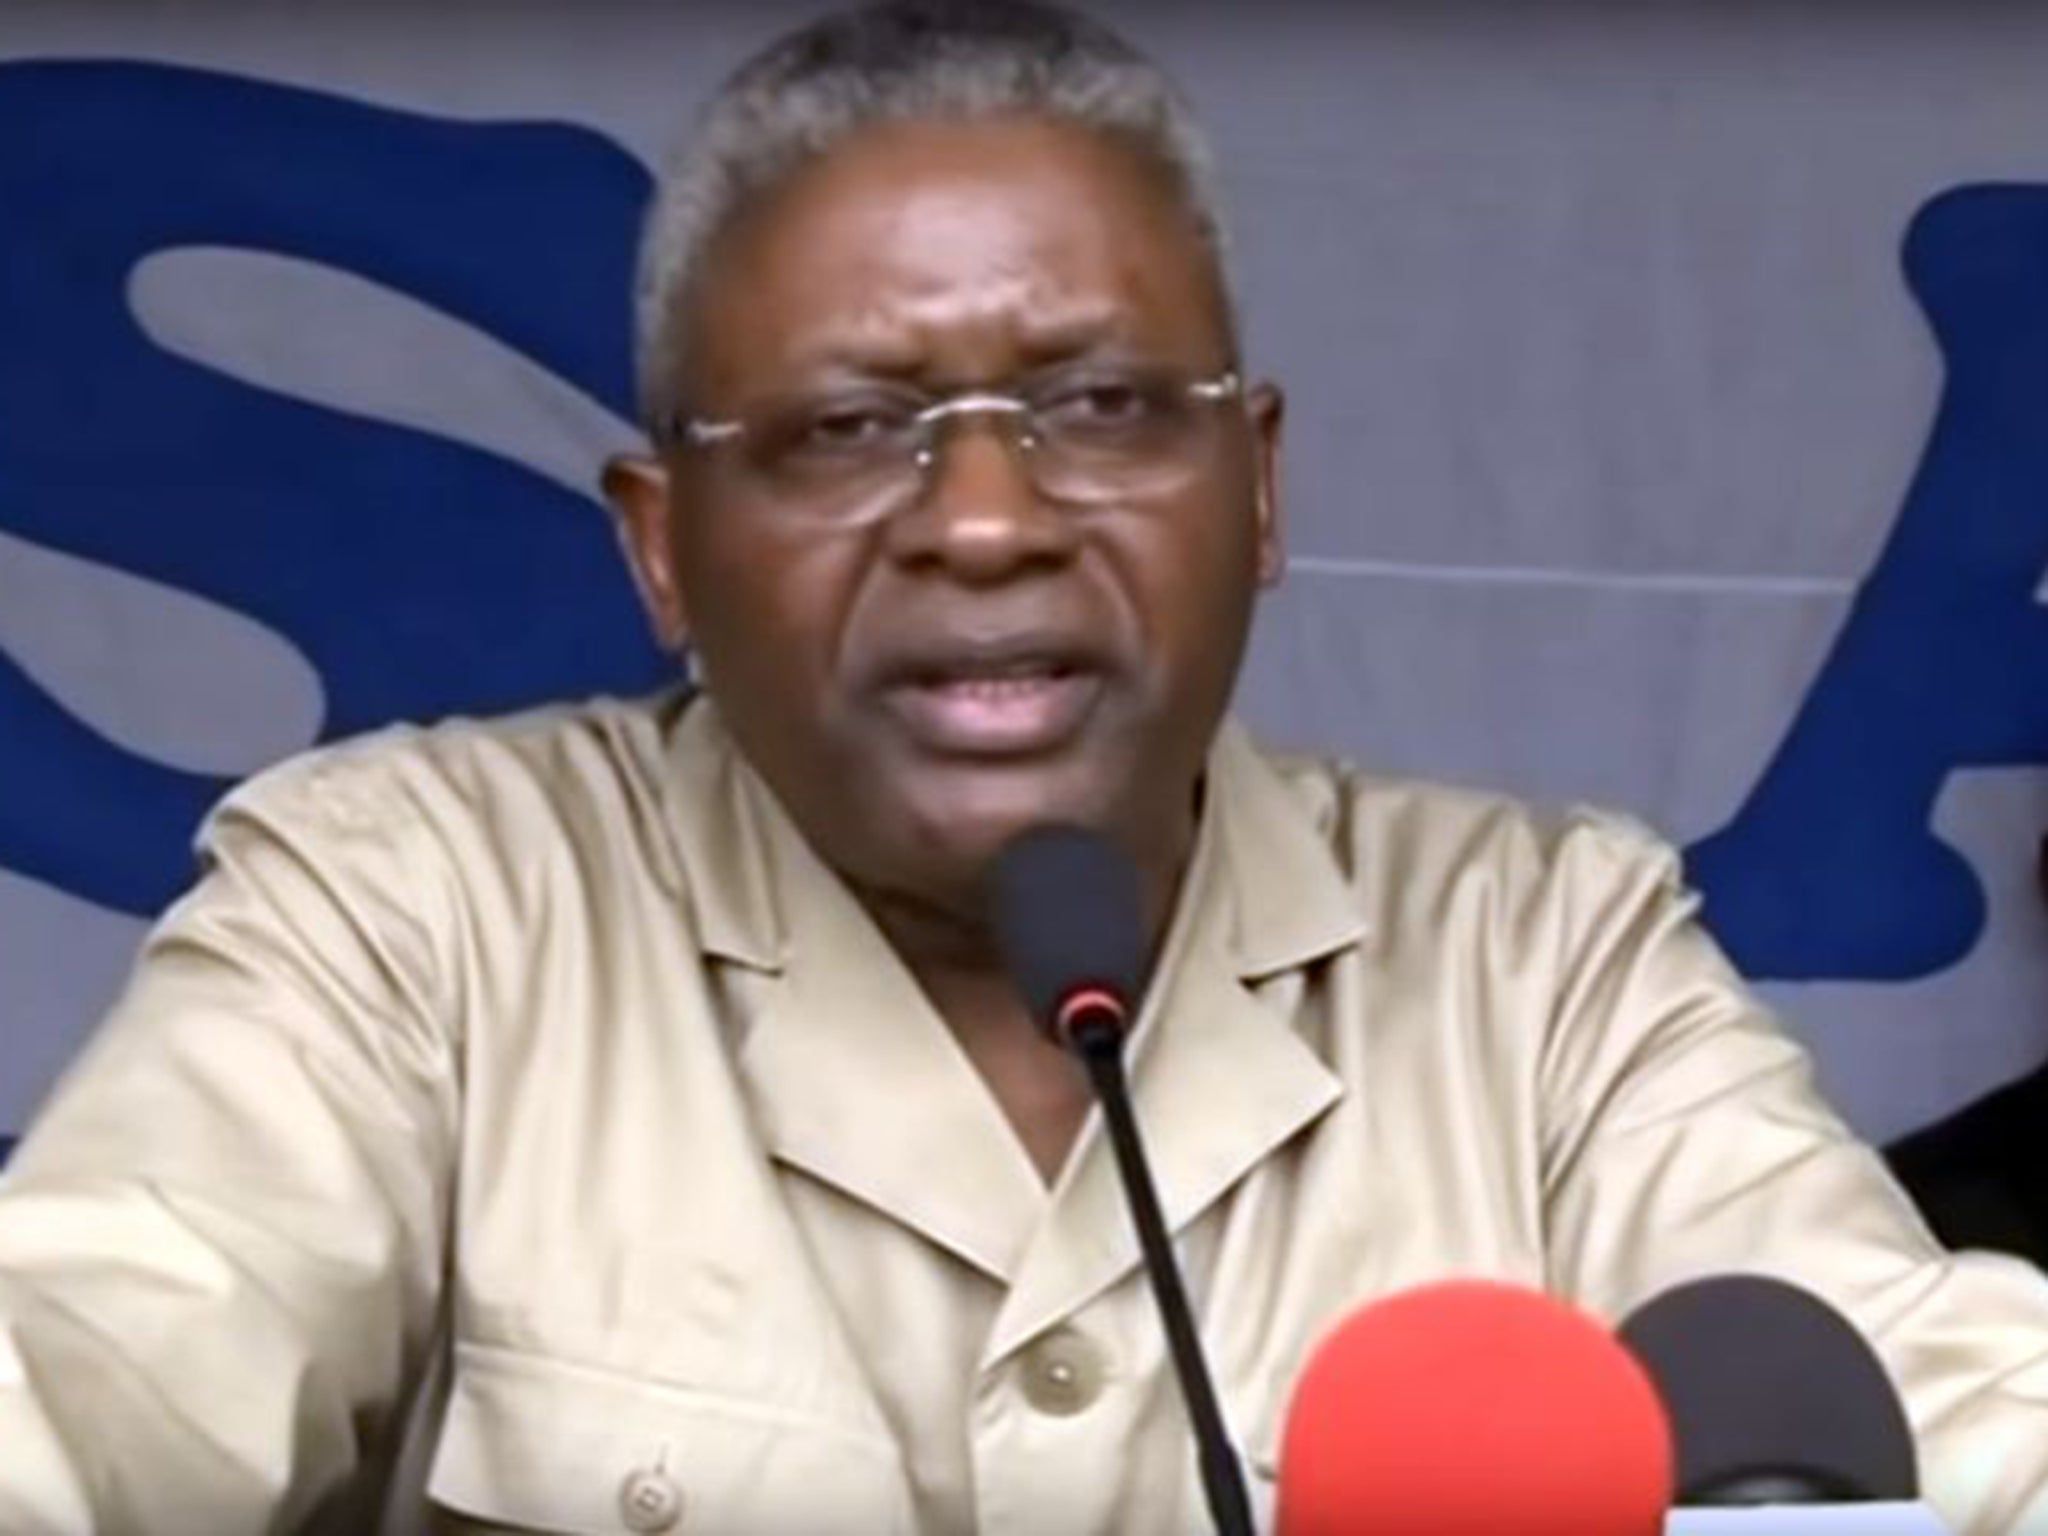 The Republic of Congo’s former Defence Minister, Pascal Tsaty Mabiala, has not been heard from in several days